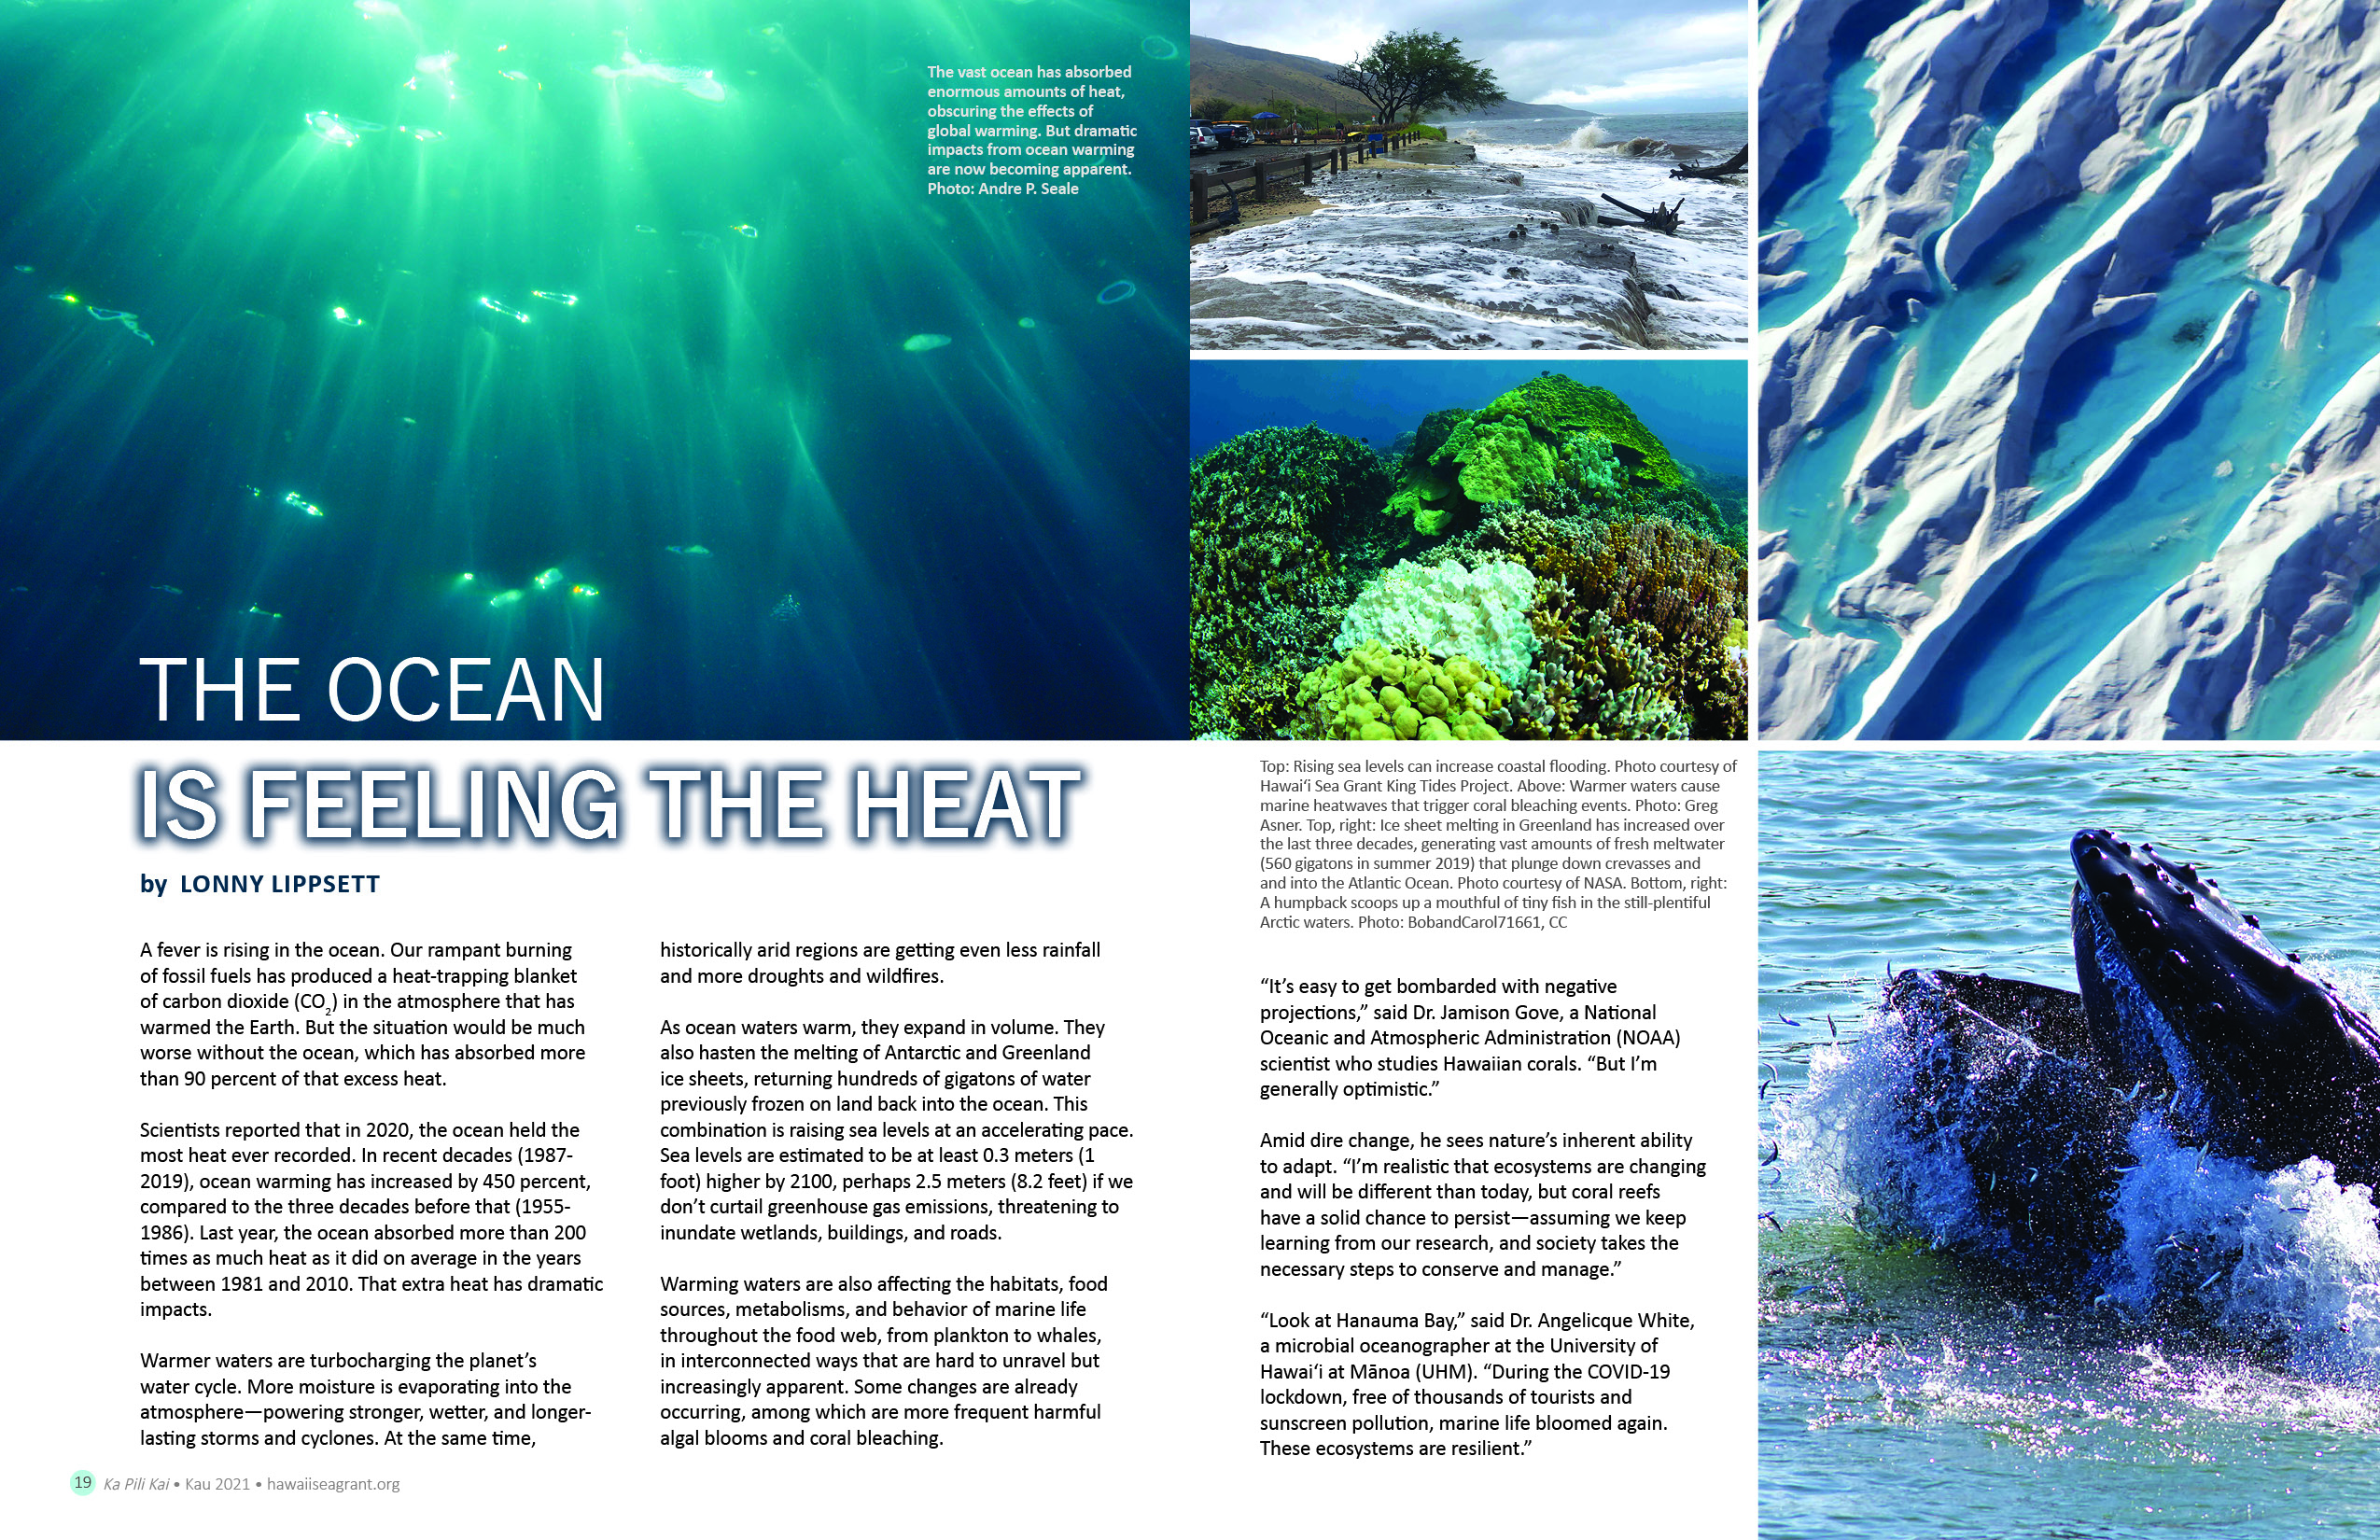 Article 'The Ocean is Feeling the Heat' by Lonny Lippsett. Includes images of a feeding Blue Whale, Coastal flooding, melting ice sheets.